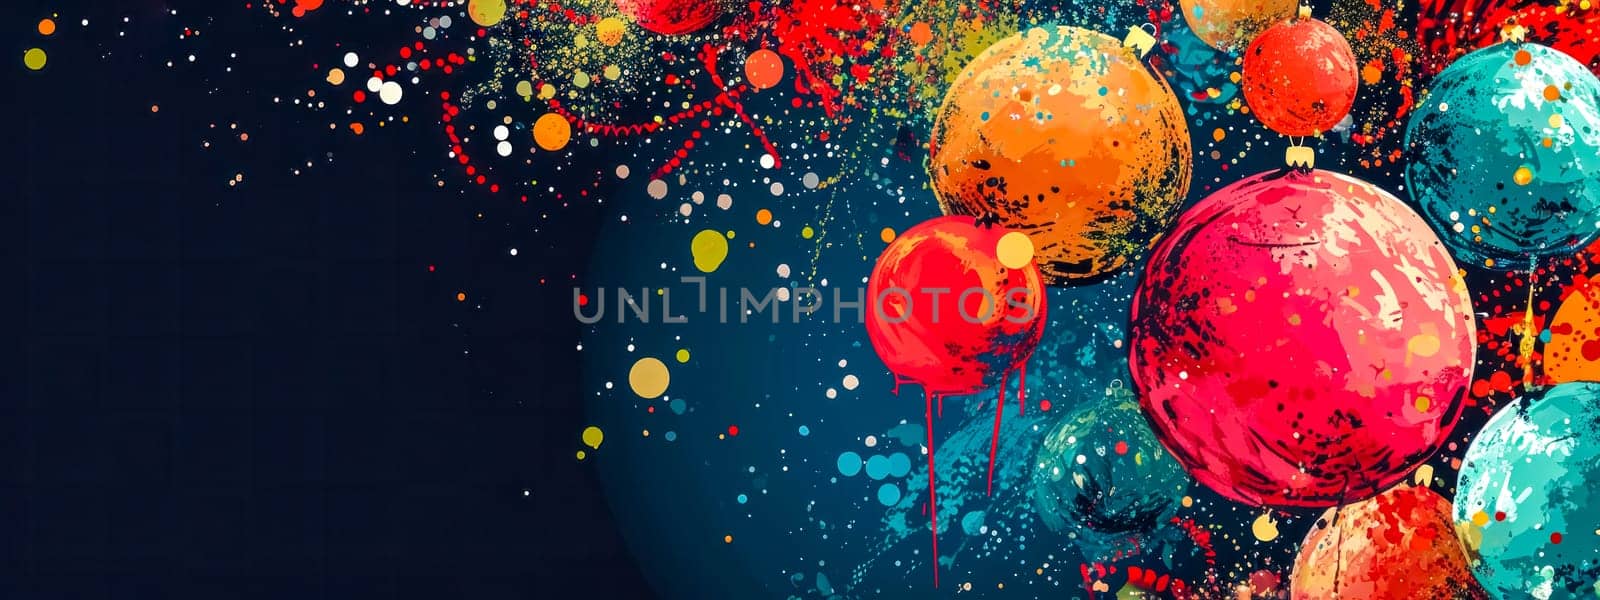 A vibrant and dynamic abstract banner featuring a burst of colorful balloons in red, orange, and blue hues, splattered with a lively array of paint drops against a deep navy background. copy space